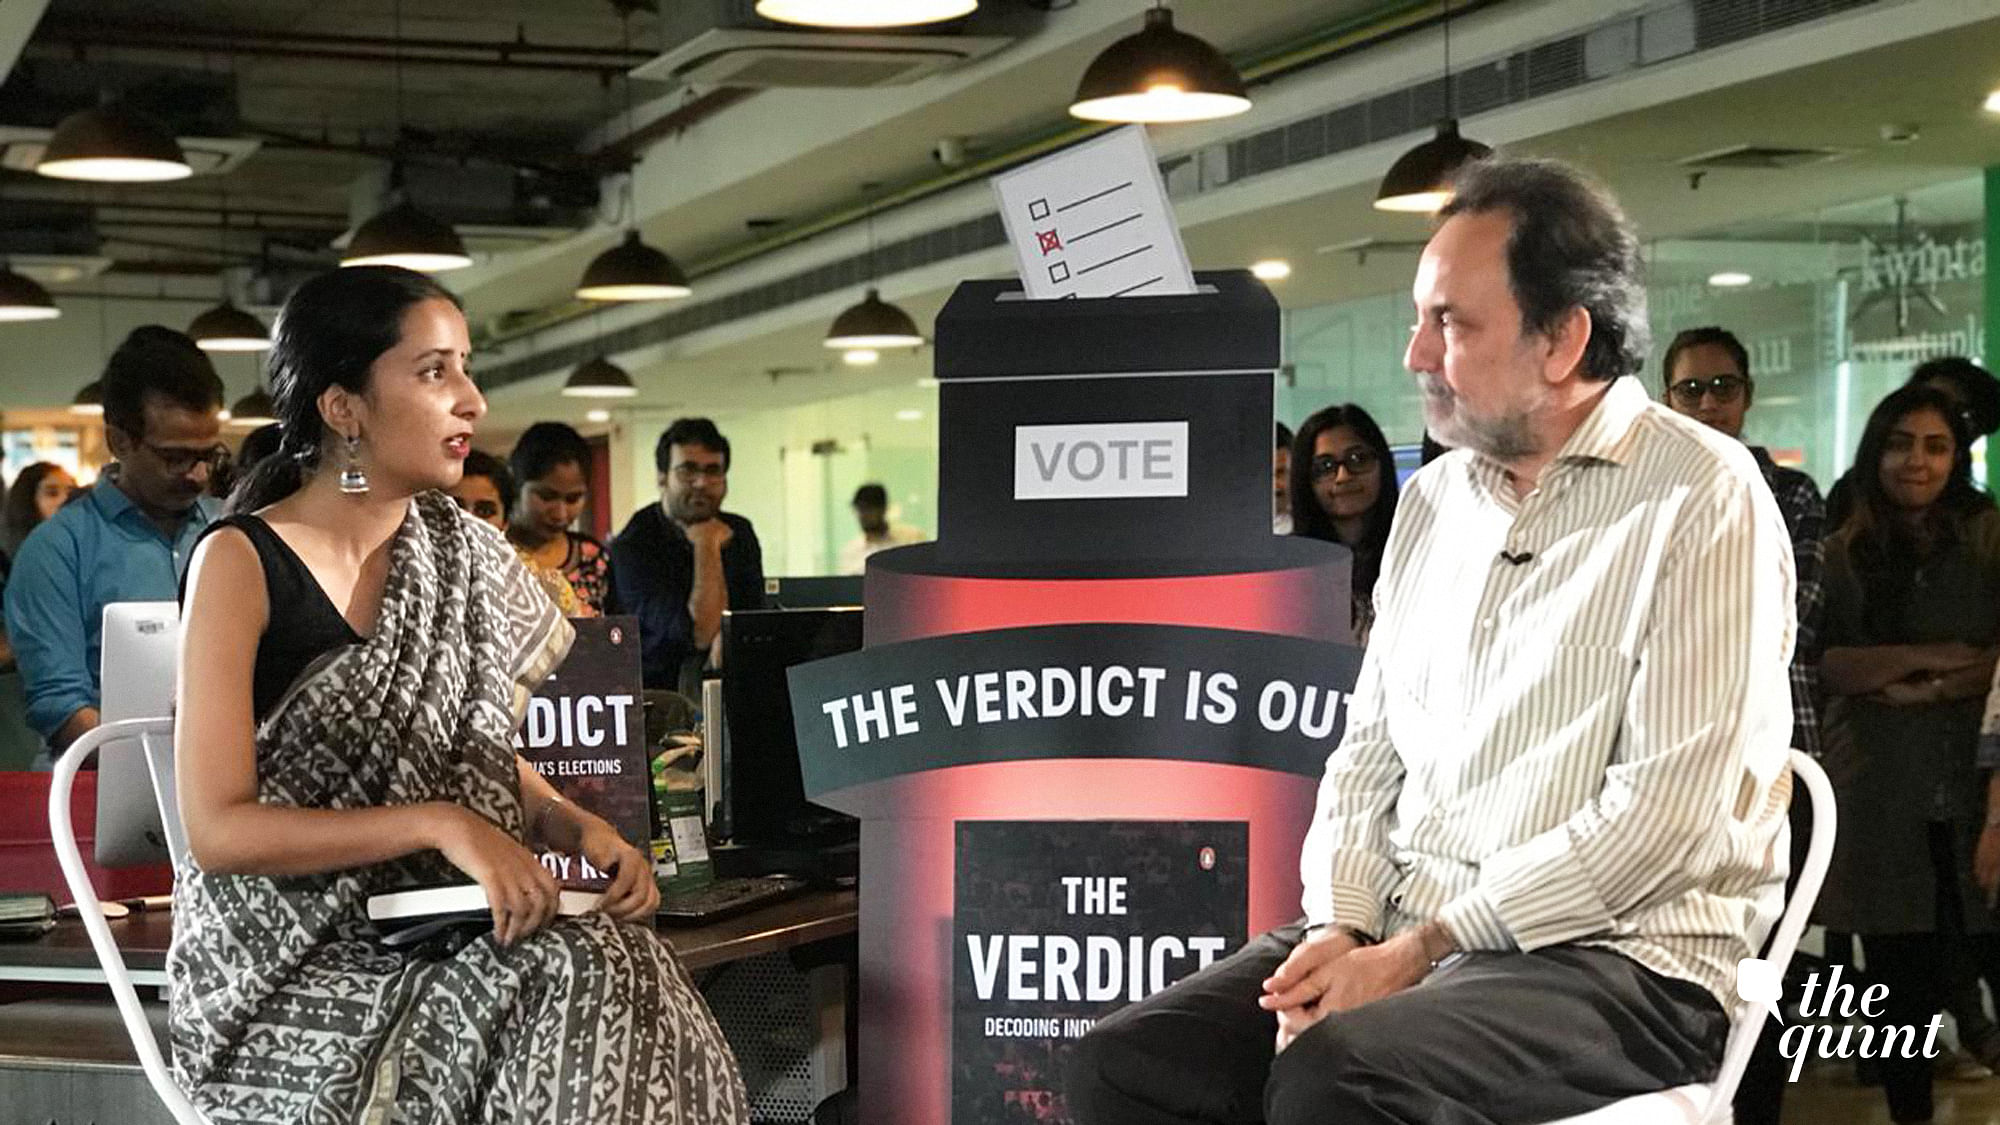 In a town hall with The Quint’s newsroom, Dr. Prannoy Roy spoke on how BJP understands alliances better than Congress, his best counting day &amp; future of Indian news.